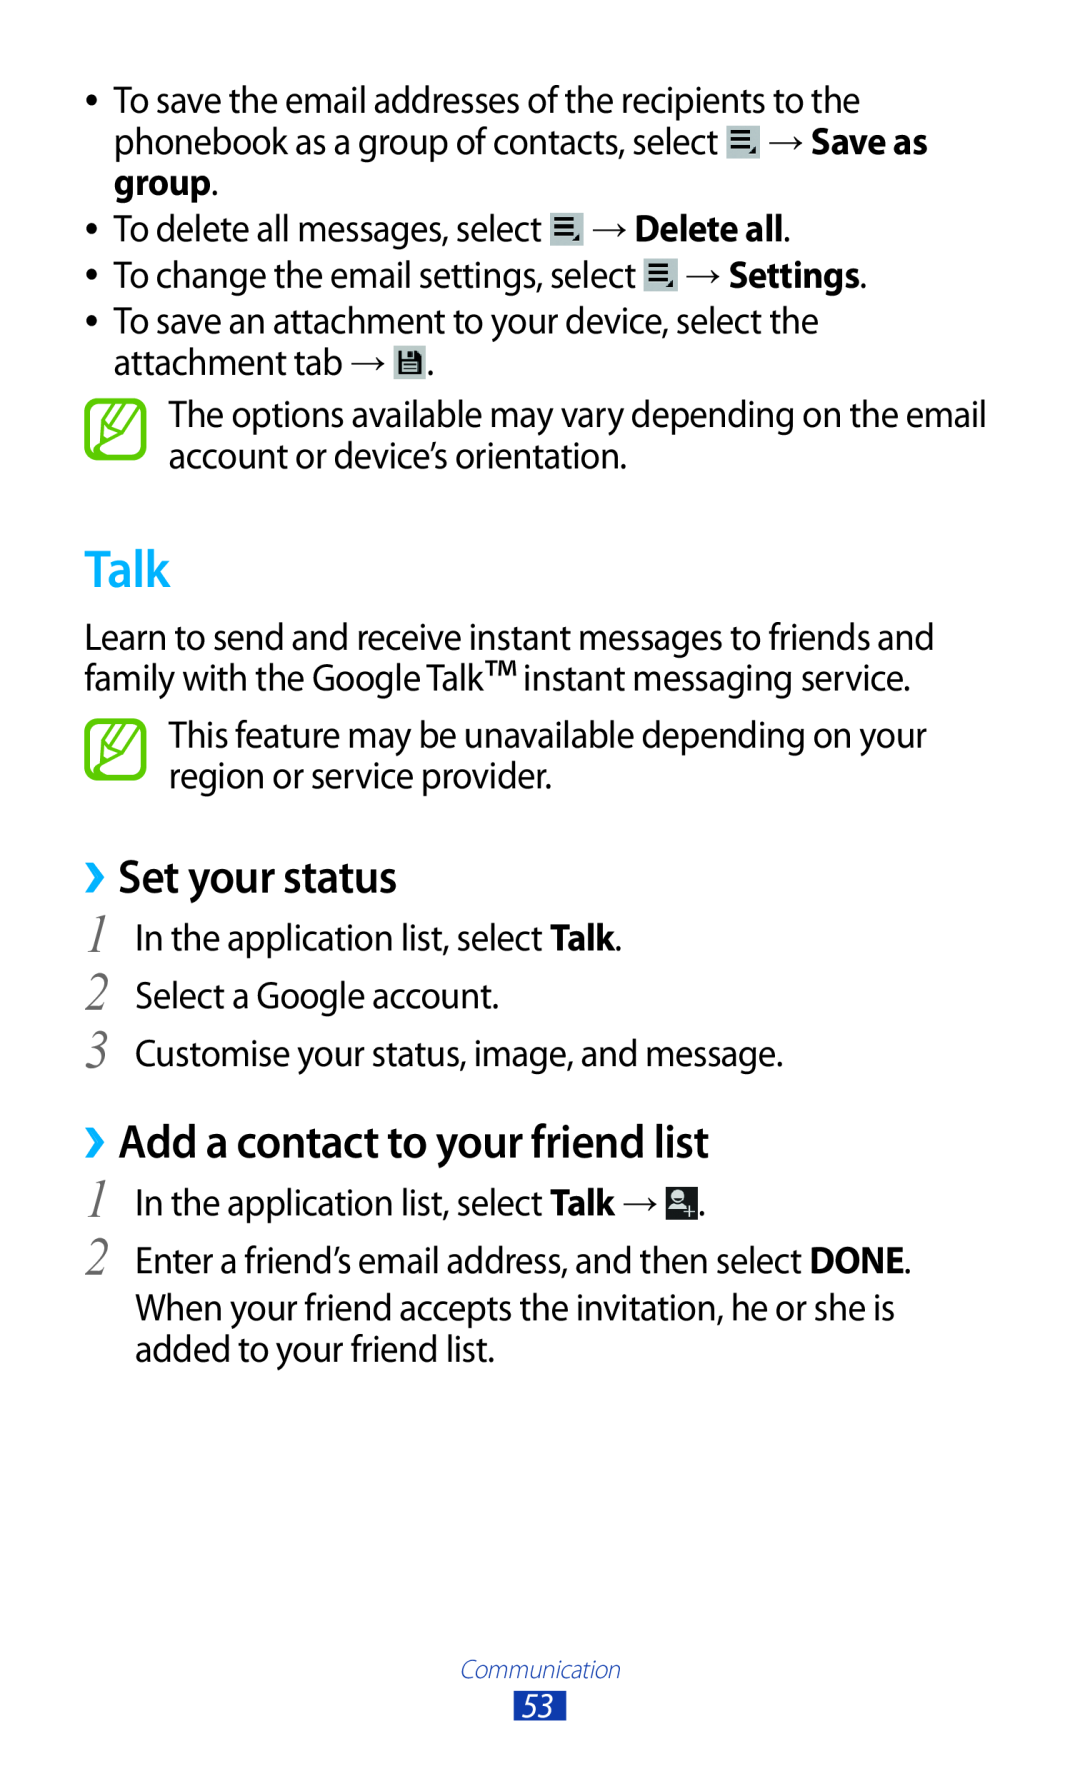 Samsung GTP5110ZWMTTT manual Talk, ››Set your status, ››Add a contact to your friend list 